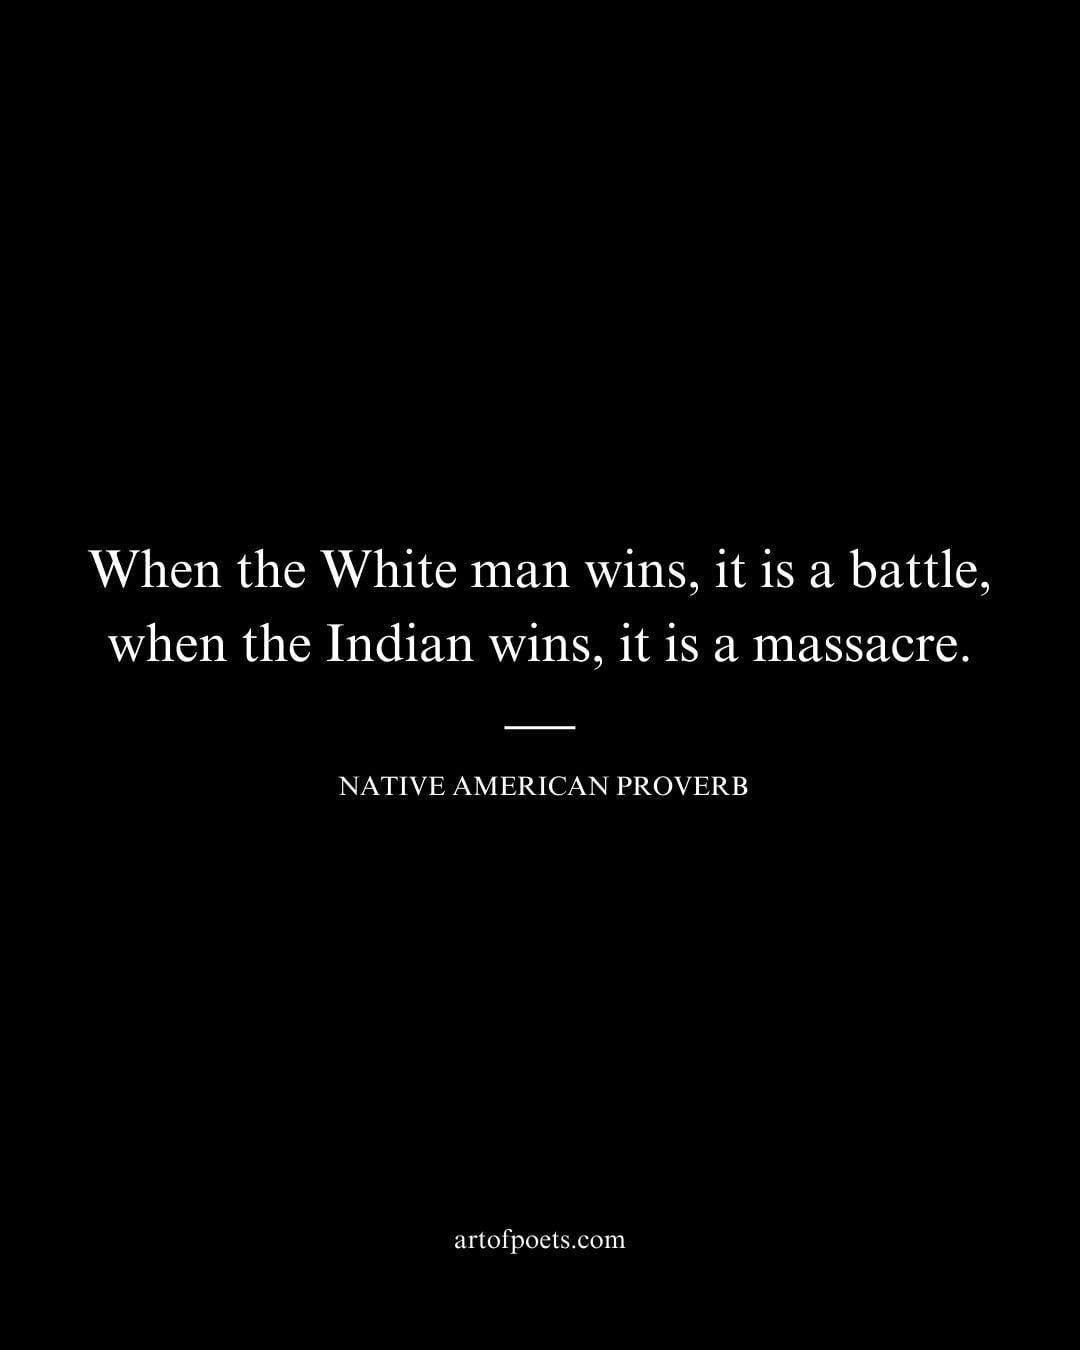 When the White man wins it is a battle when the Indian wins it is a massacre